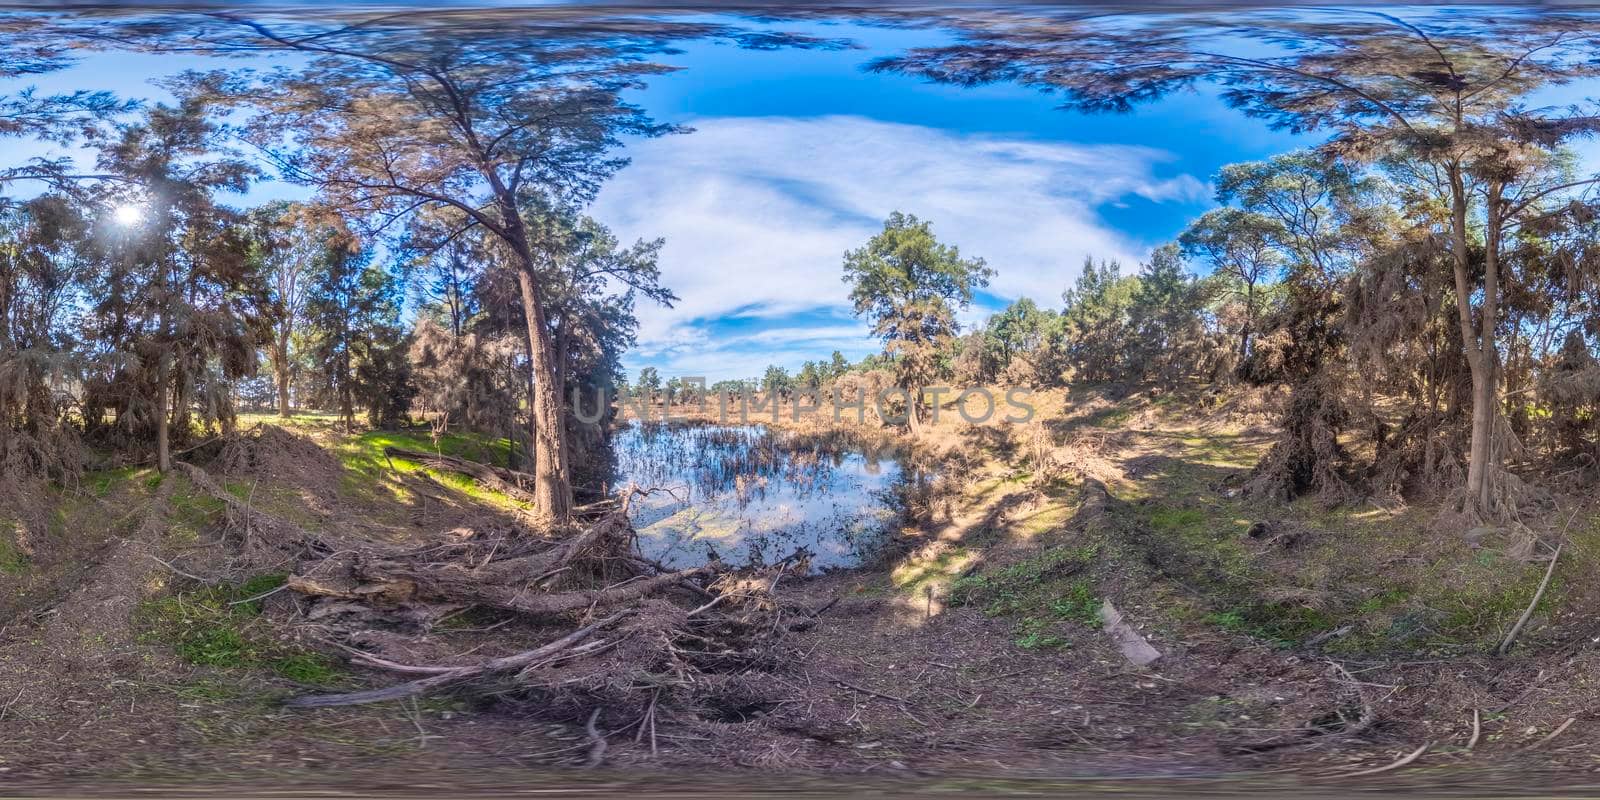 Spherical panoramic photograph of the Grose River Lagoon after severe flooding in Yarramundi Reserve in the Hawkesbury region of New South Wales in Australia